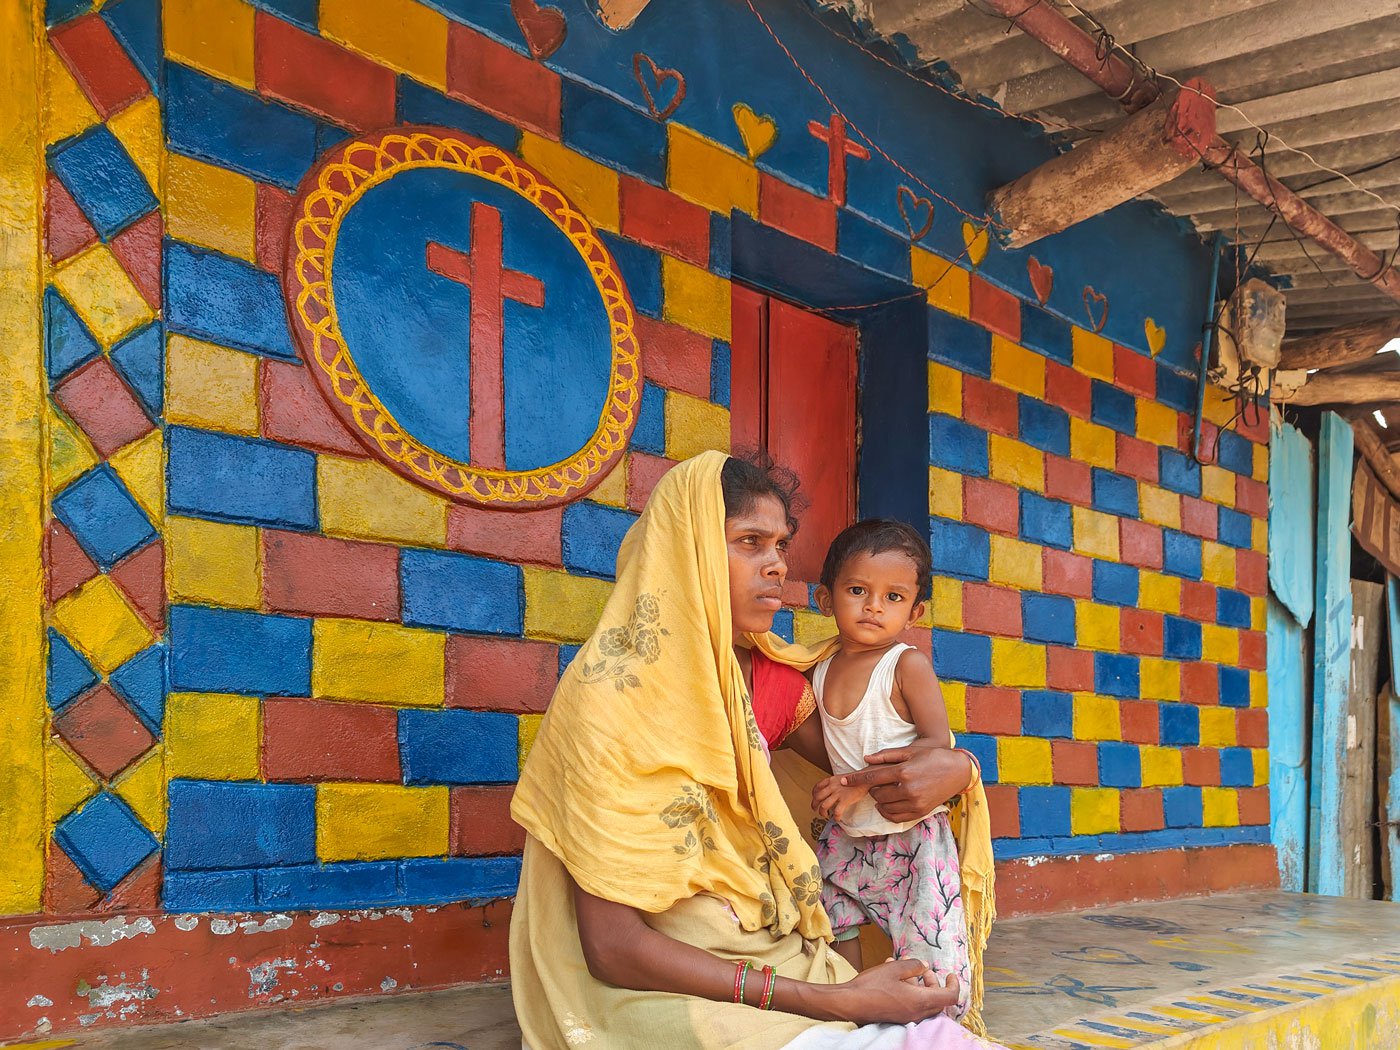 Arracote is a small village with a population of just over 2,500. 'In moments like these you expect people in your village to provide emotional support,' says Sukmiti, seen here with her newborn in front of the house.